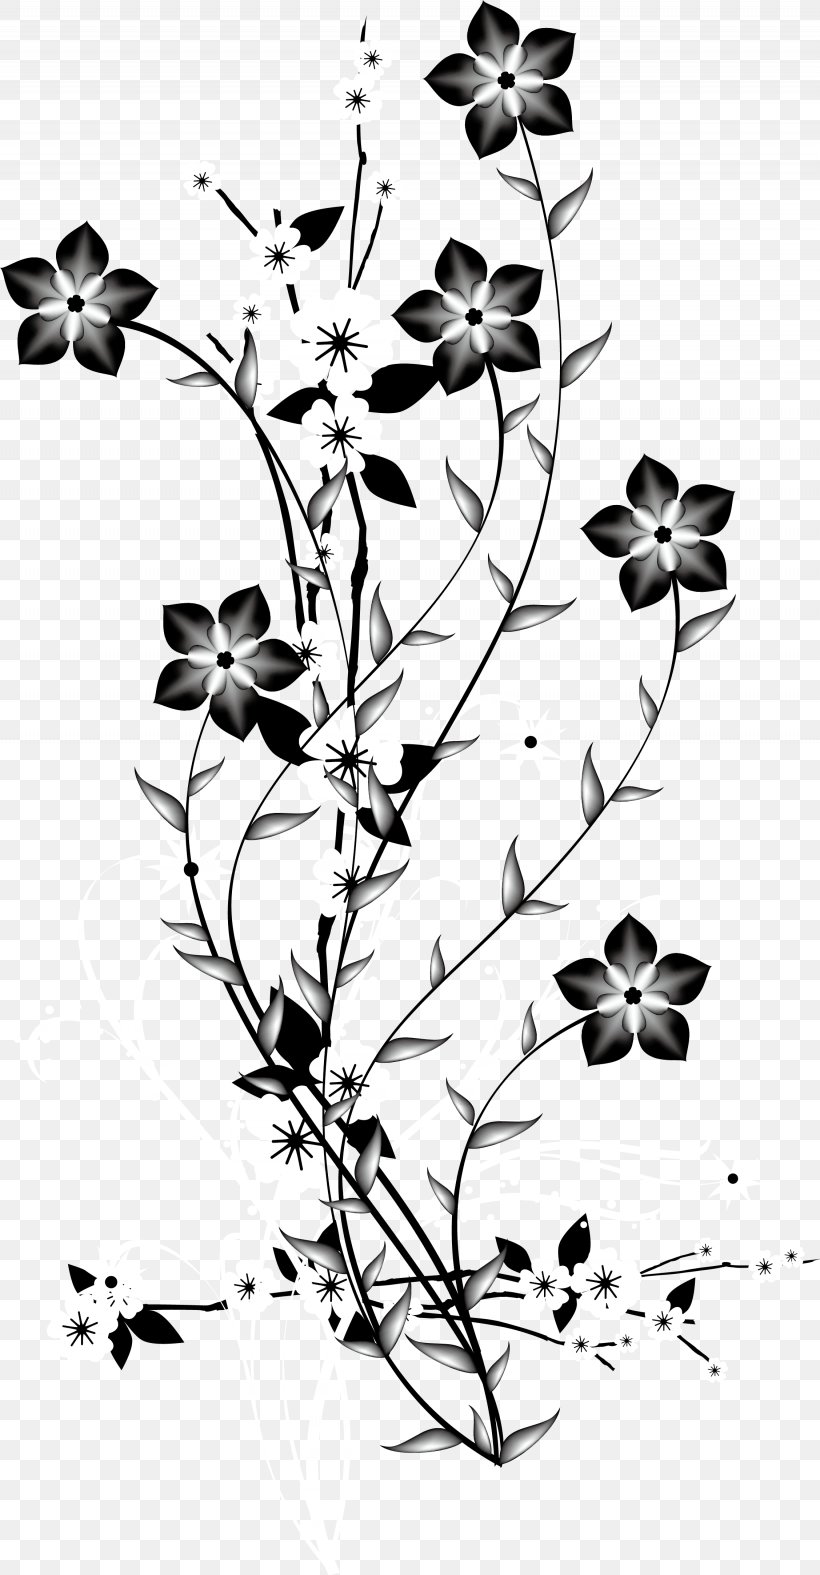 Flower Vector Png Black And White - Images | Amashusho